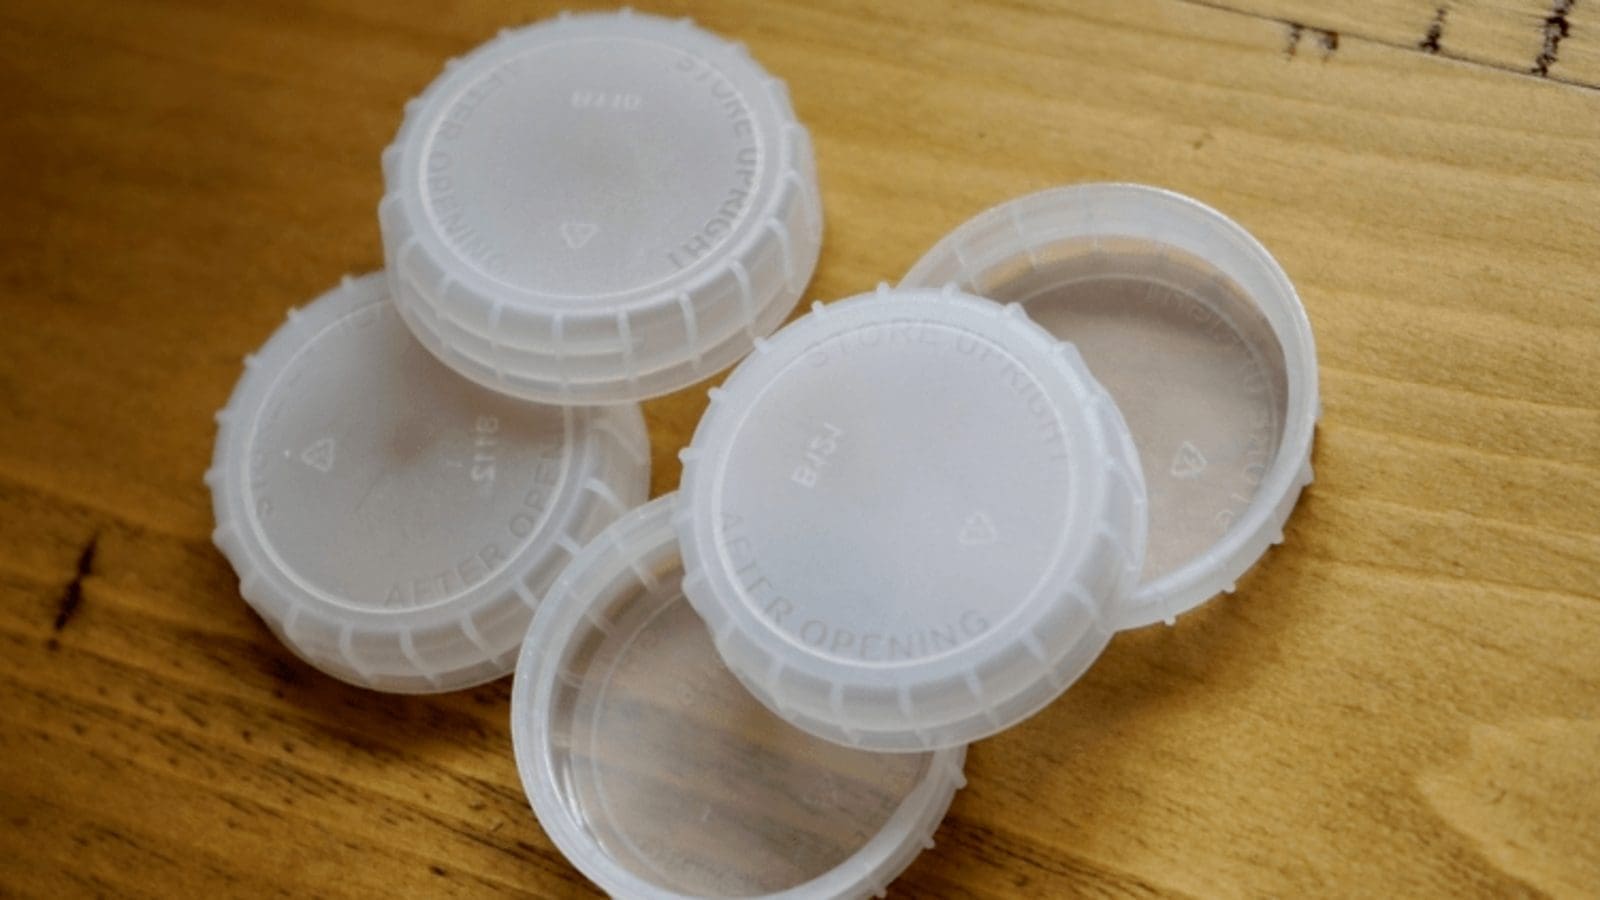 Lidl GB to shift semi-skimmed milk container lids from green-color to clear for easy recycling